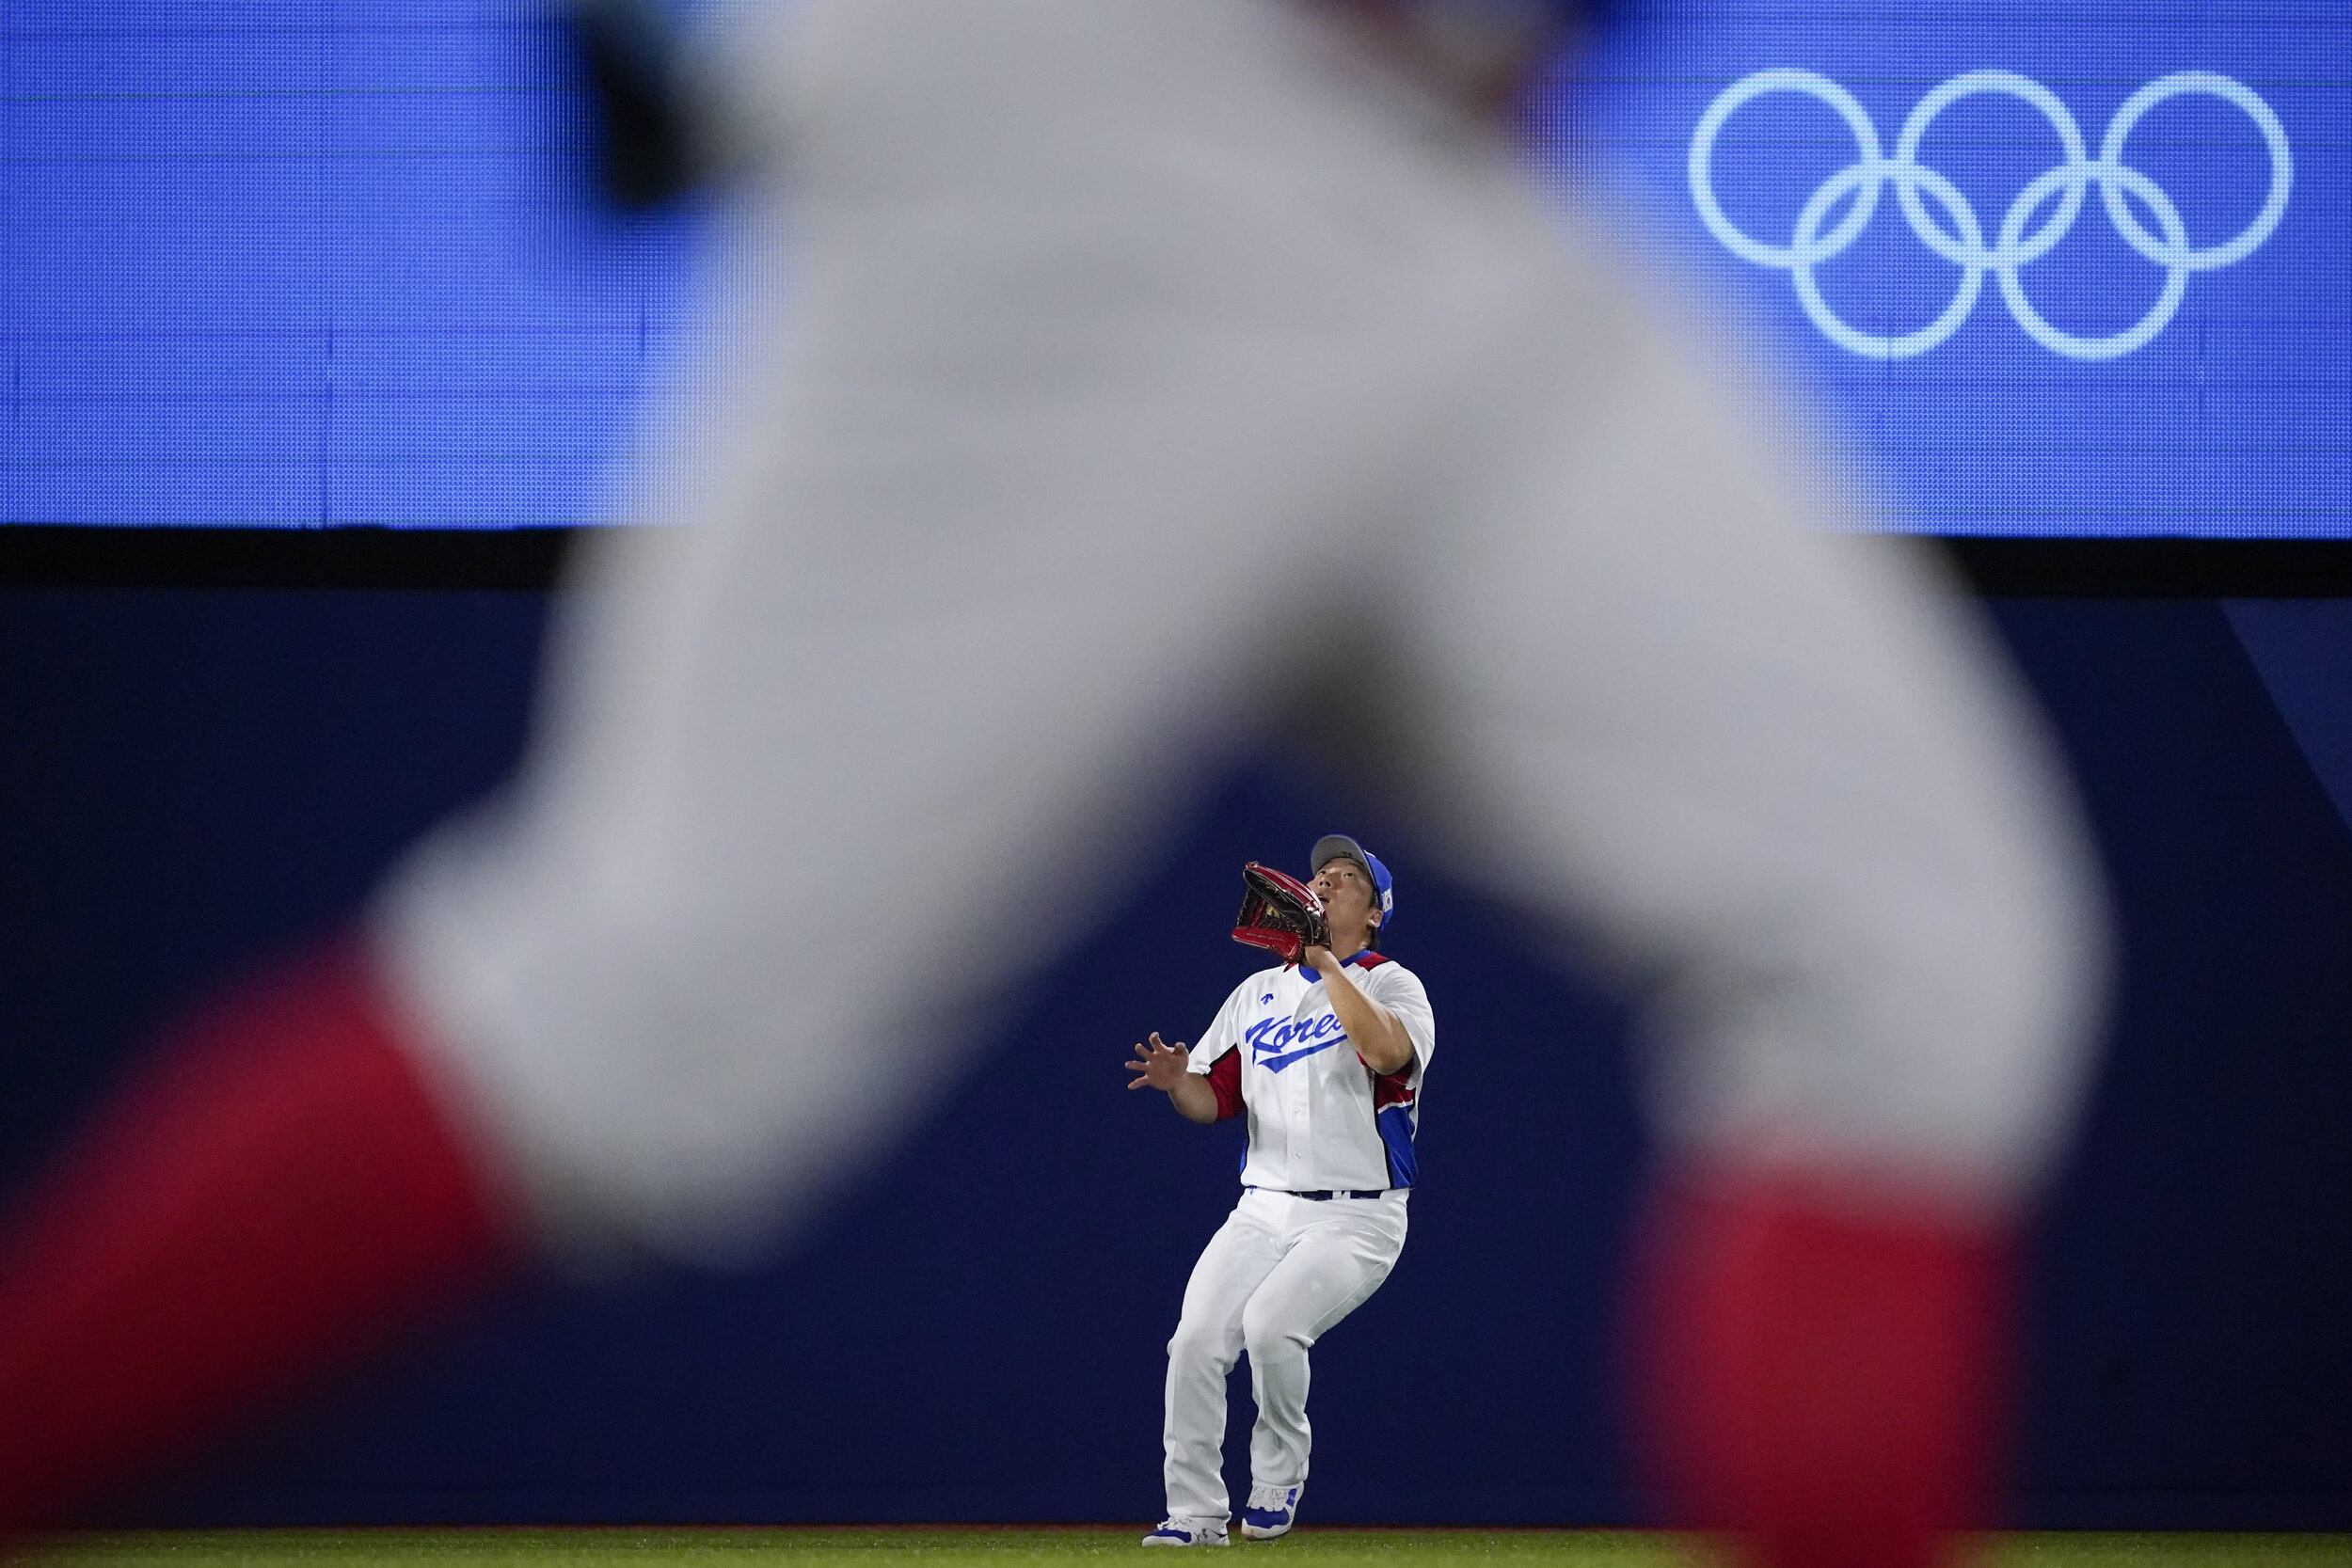  South Korea's Hyunsoo Kim looks catch a fly out hit by Dominican Republic's Melky Cabrera a baseball game at the 2020 Summer Olympics, Sunday, Aug. 1, 2021, in Yokohama, Japan. (AP Photo/Sue Ogrocki) 